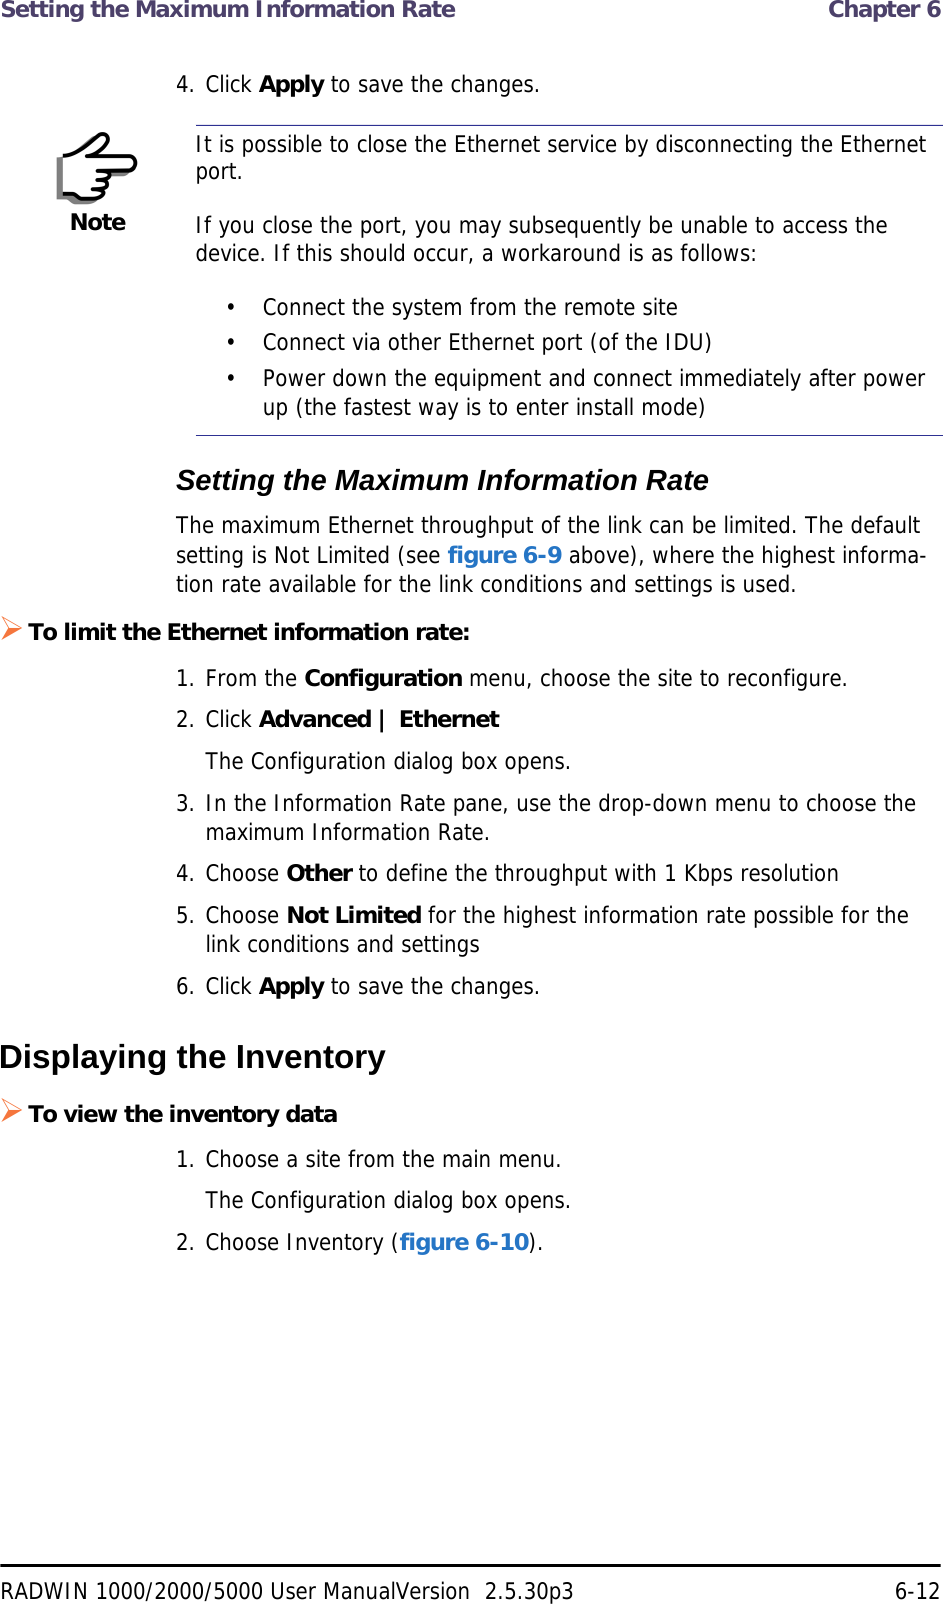 Setting the Maximum Information Rate  Chapter 6RADWIN 1000/2000/5000 User ManualVersion  2.5.30p3 6-124. Click Apply to save the changes.Setting the Maximum Information RateThe maximum Ethernet throughput of the link can be limited. The default setting is Not Limited (see figure 6-9 above), where the highest informa-tion rate available for the link conditions and settings is used.To limit the Ethernet information rate:1. From the Configuration menu, choose the site to reconfigure.2. Click Advanced | EthernetThe Configuration dialog box opens.3. In the Information Rate pane, use the drop-down menu to choose the maximum Information Rate.4. Choose Other to define the throughput with 1 Kbps resolution5. Choose Not Limited for the highest information rate possible for the link conditions and settings6. Click Apply to save the changes.Displaying the InventoryTo view the inventory data1. Choose a site from the main menu.The Configuration dialog box opens.2. Choose Inventory (figure 6-10).NoteIt is possible to close the Ethernet service by disconnecting the Ethernet port.If you close the port, you may subsequently be unable to access the device. If this should occur, a workaround is as follows:• Connect the system from the remote site• Connect via other Ethernet port (of the IDU)• Power down the equipment and connect immediately after power up (the fastest way is to enter install mode)